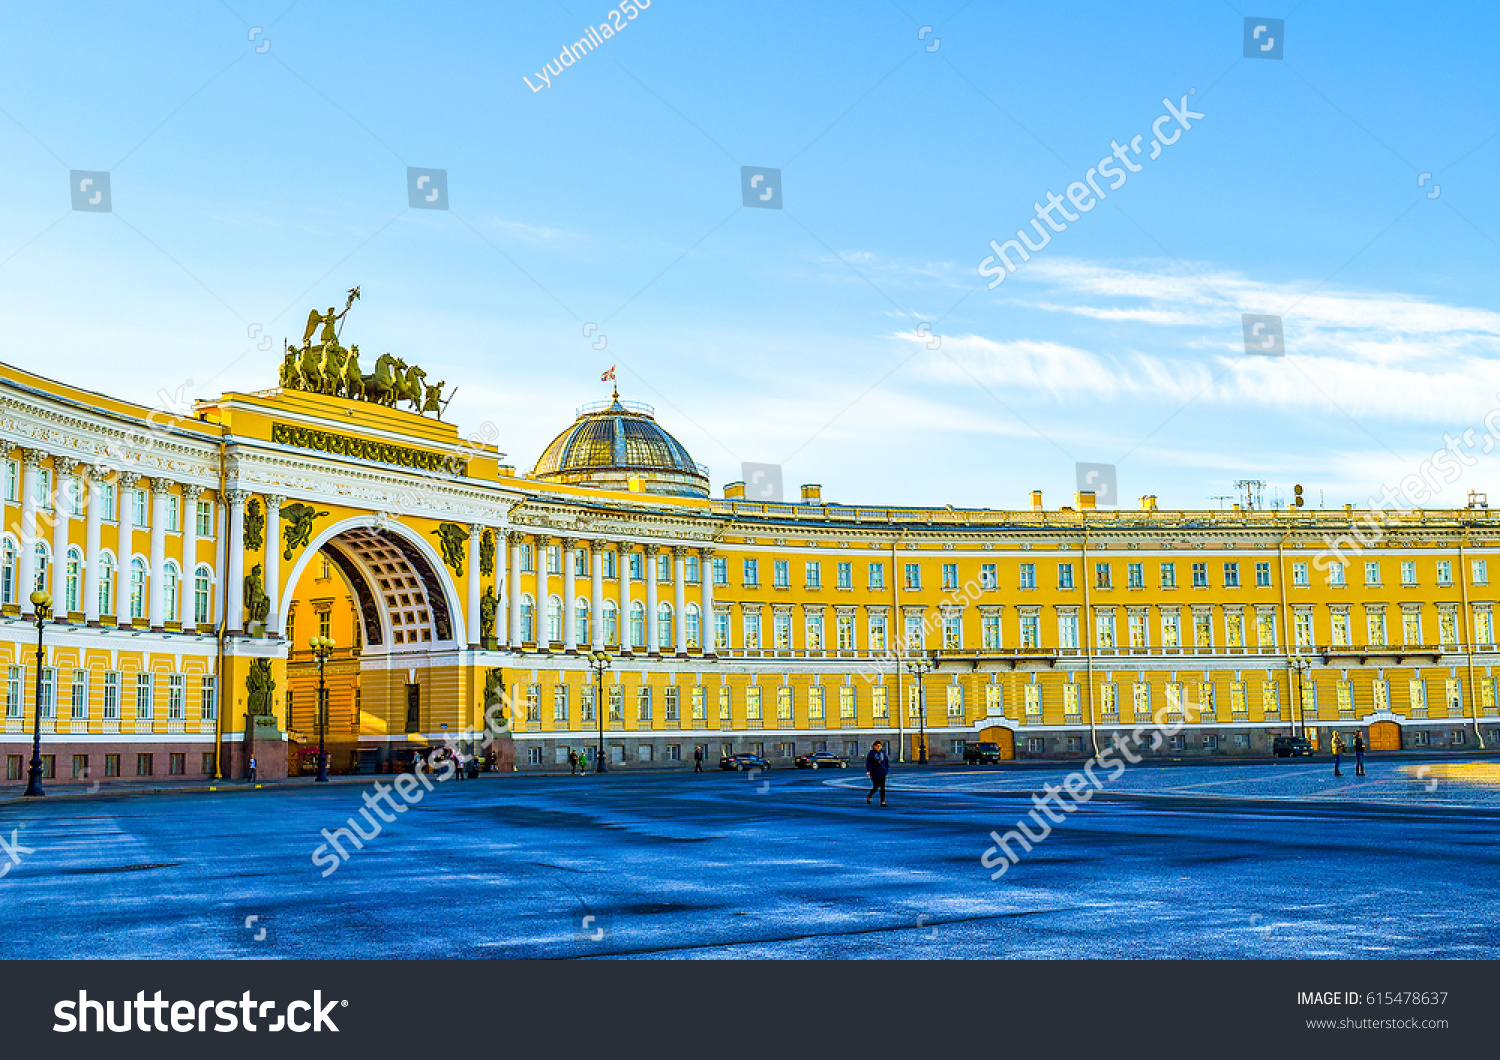 SAINT-PETERSBURG, RUSSIA - Arch of General Staff on Palace Square in St Petersburg, Russia in autumn morning #615478637